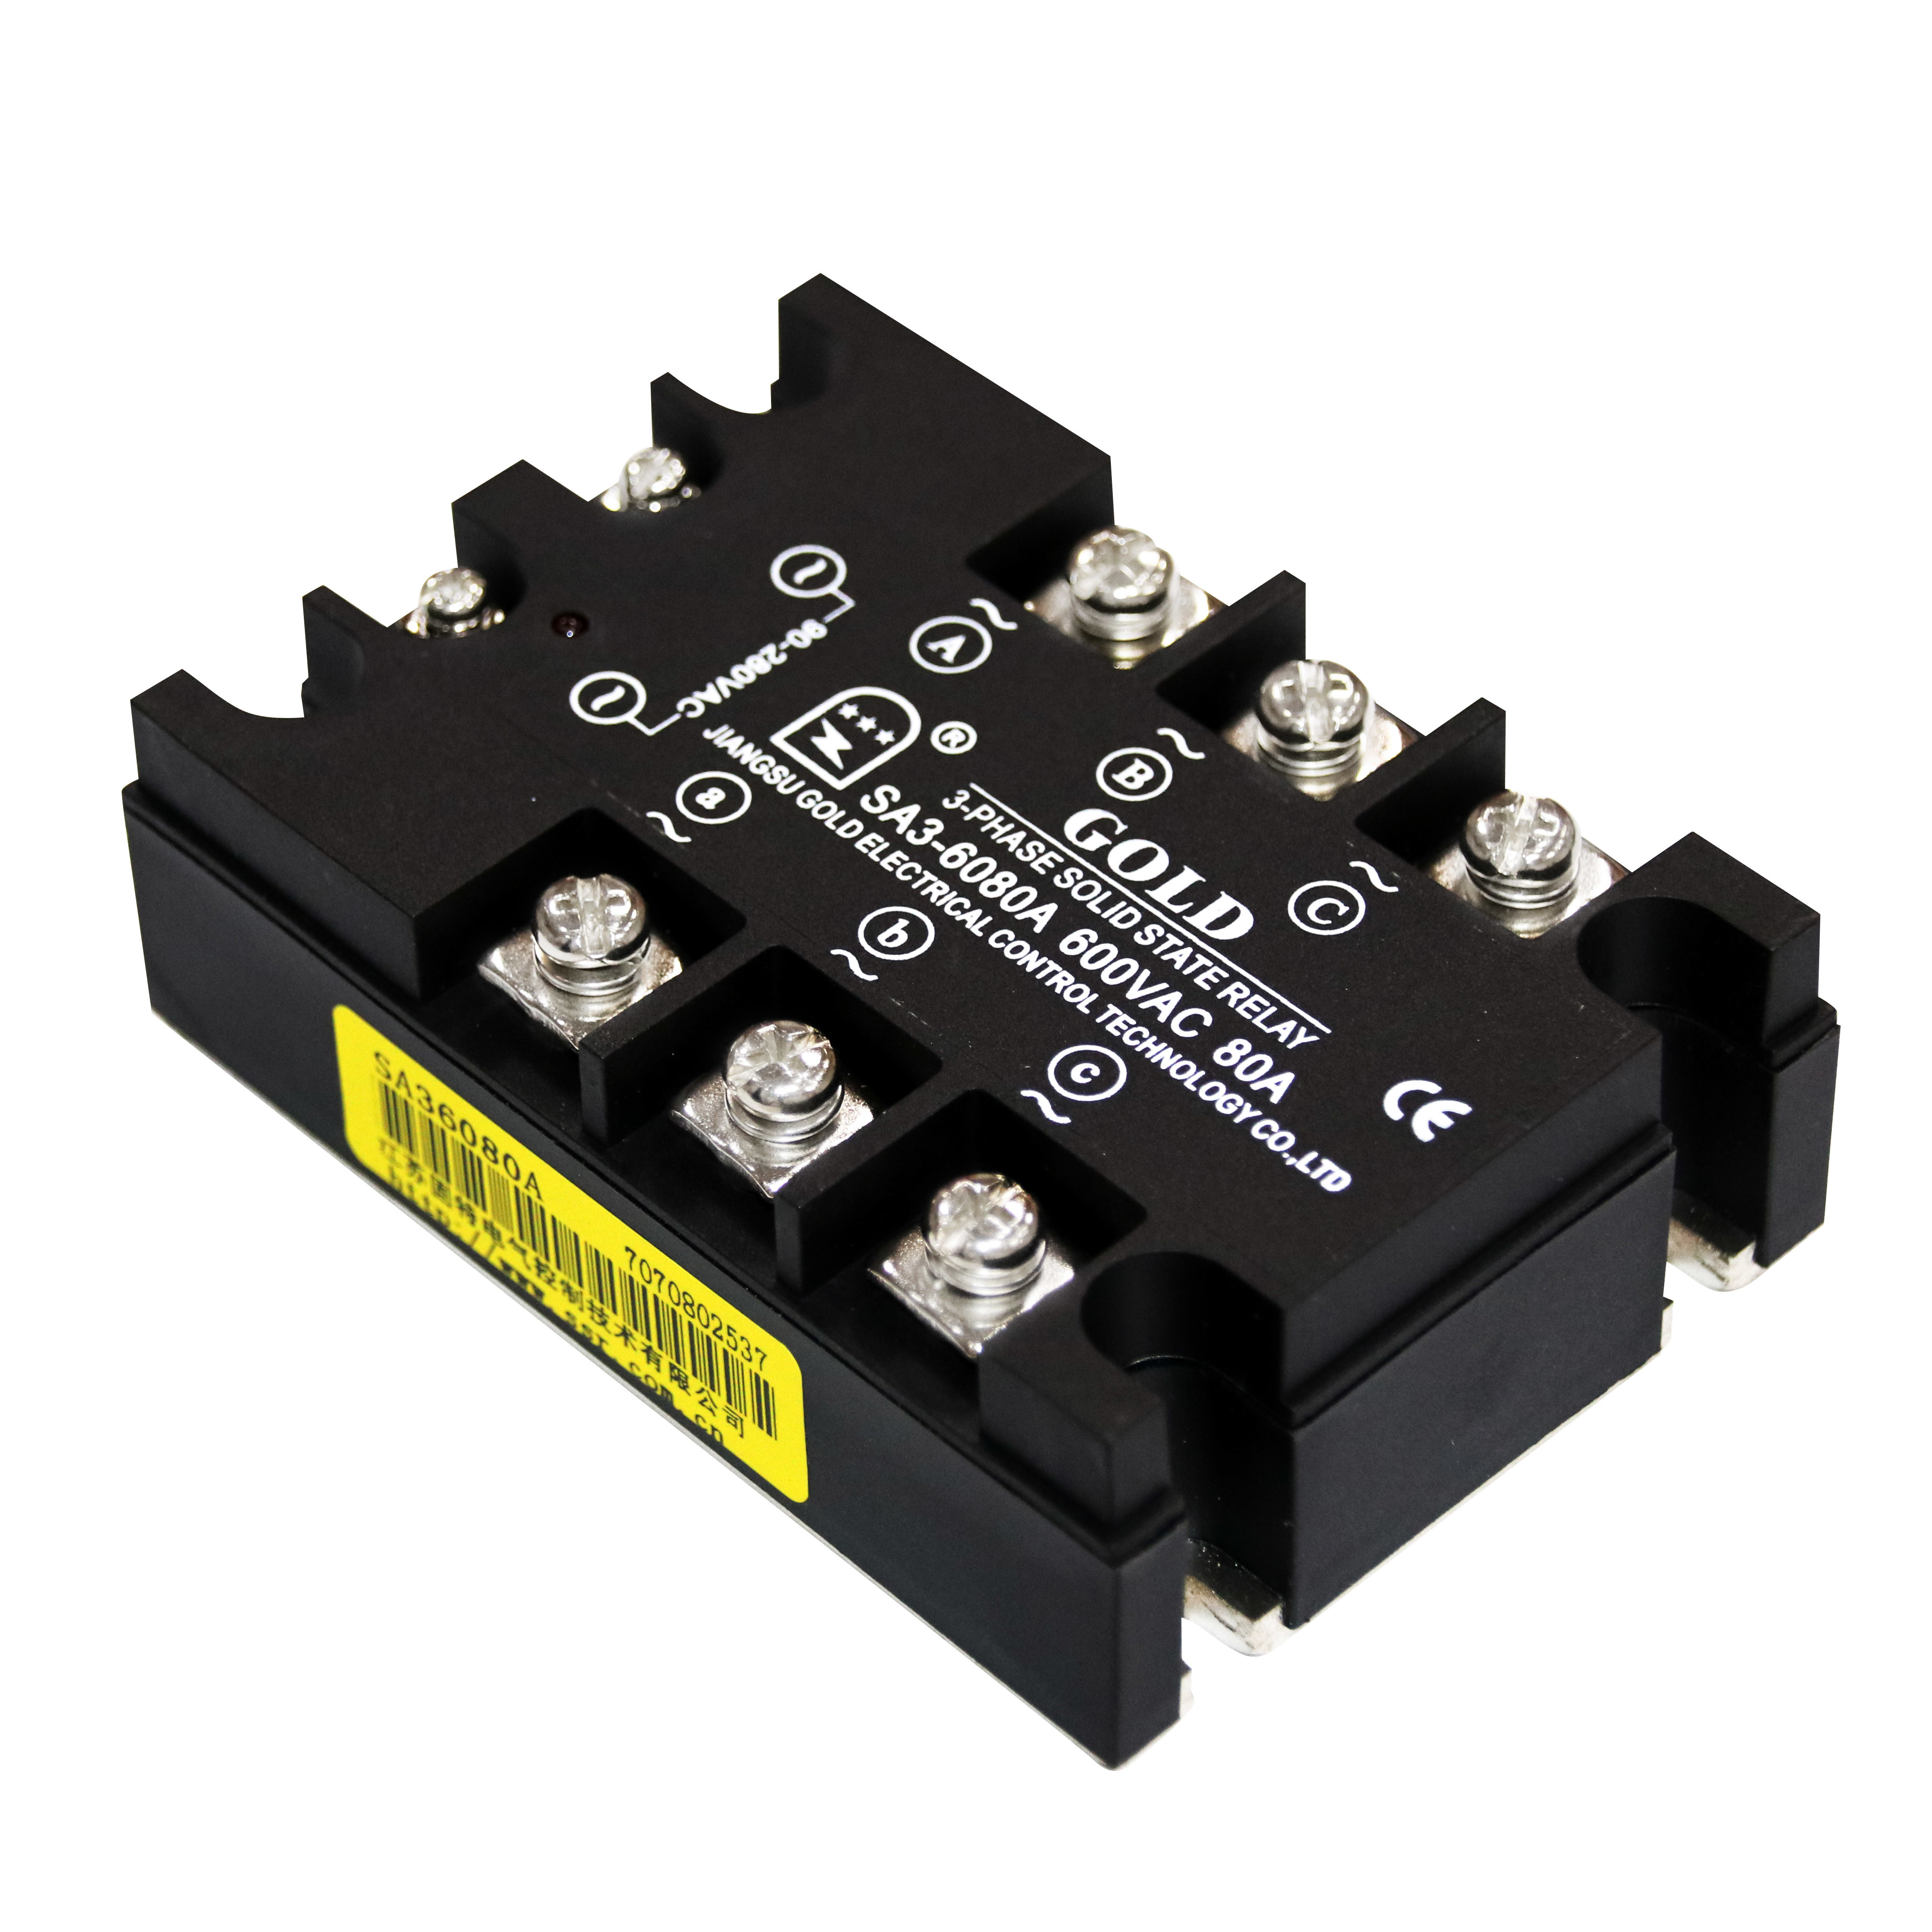 Buy cheap 3 Phase SSR Relay 24vdc 20a product